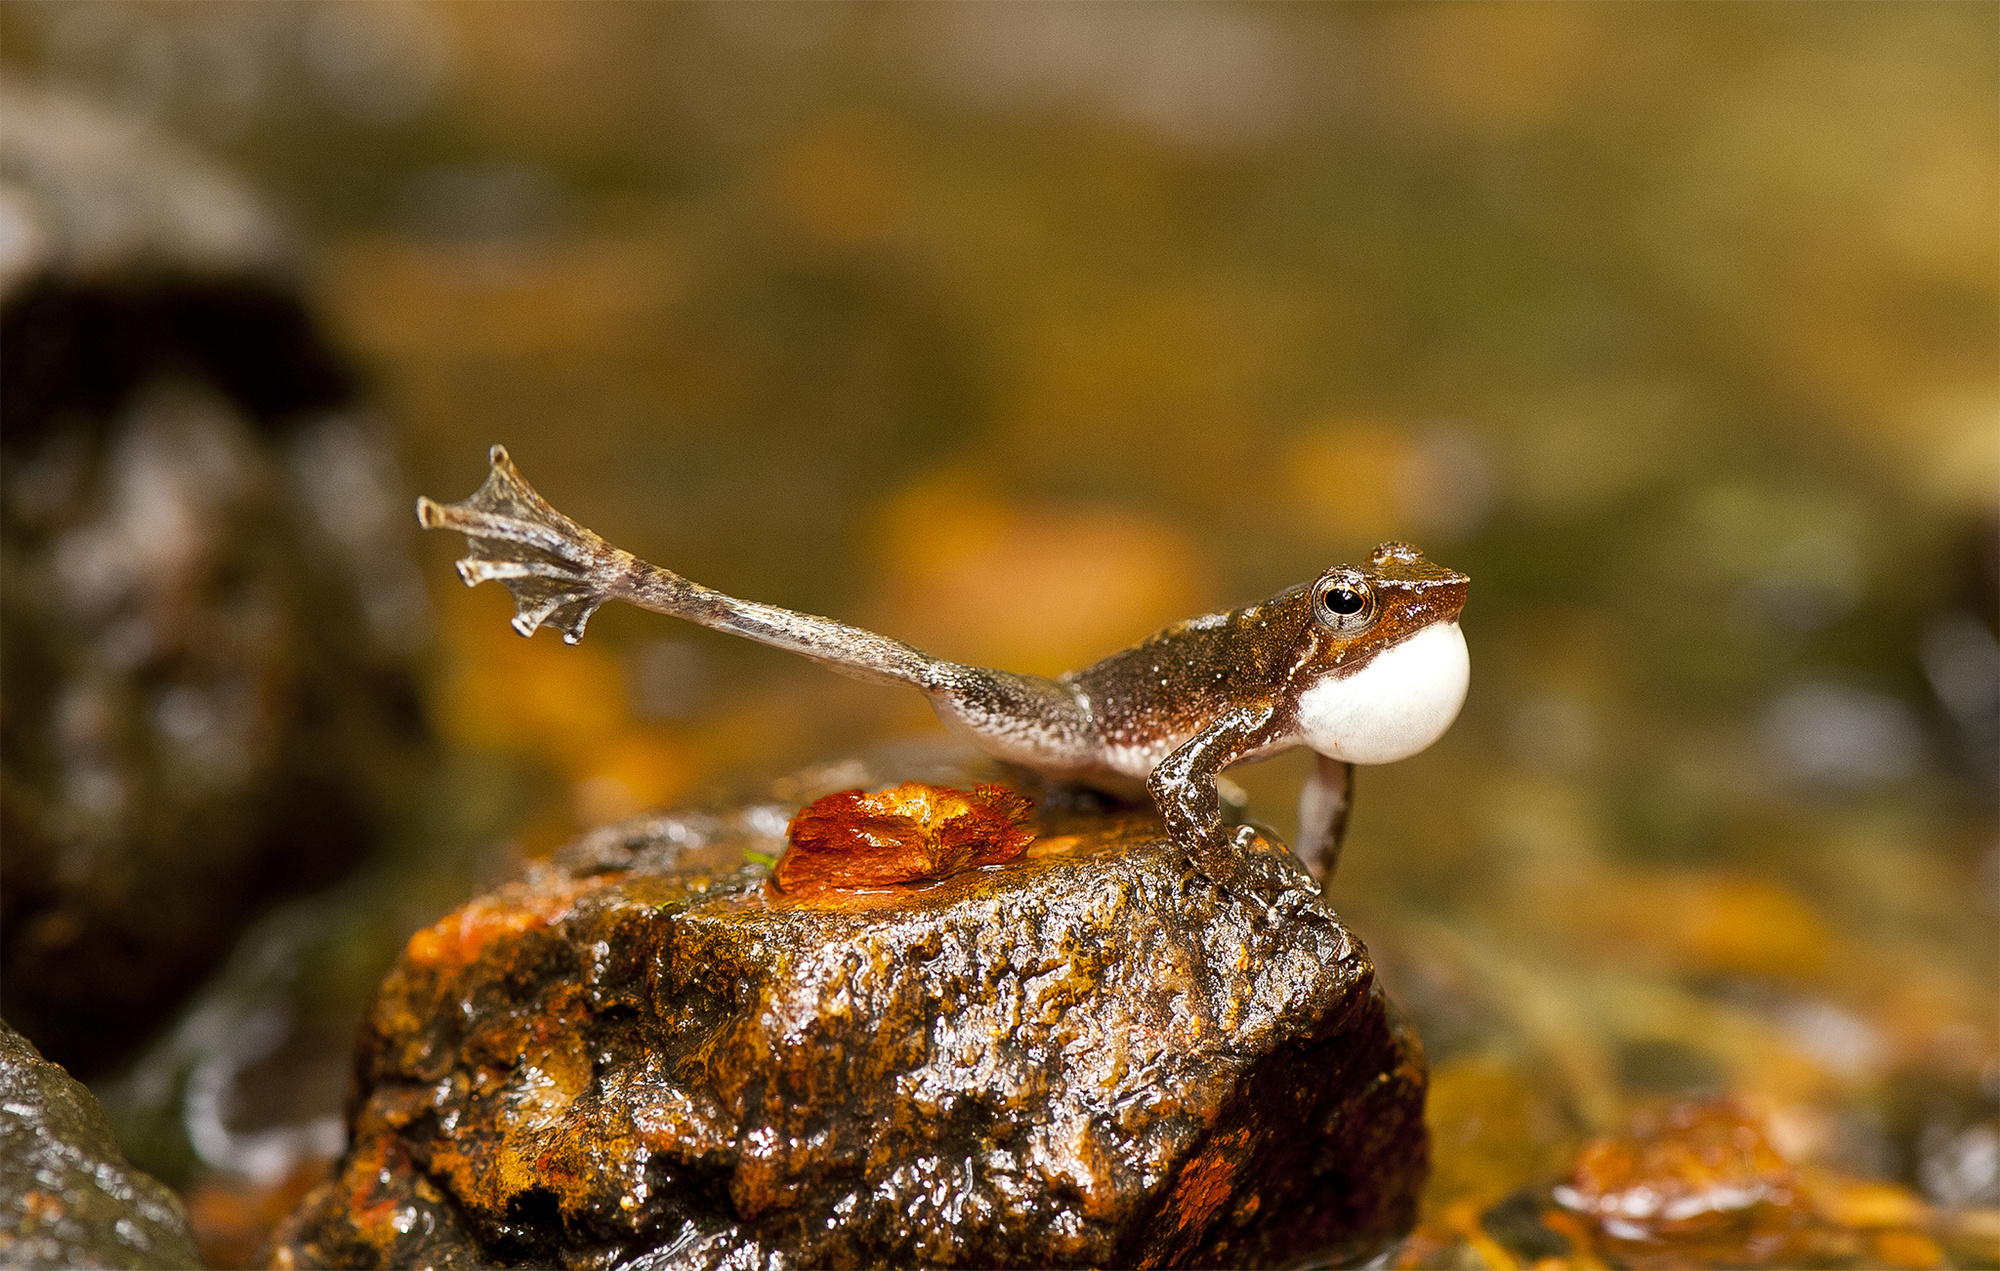 There are frogs in Western Ghats, India that are known as the dancing frogs. The males stretch out their hind legs one at a time to attract females.